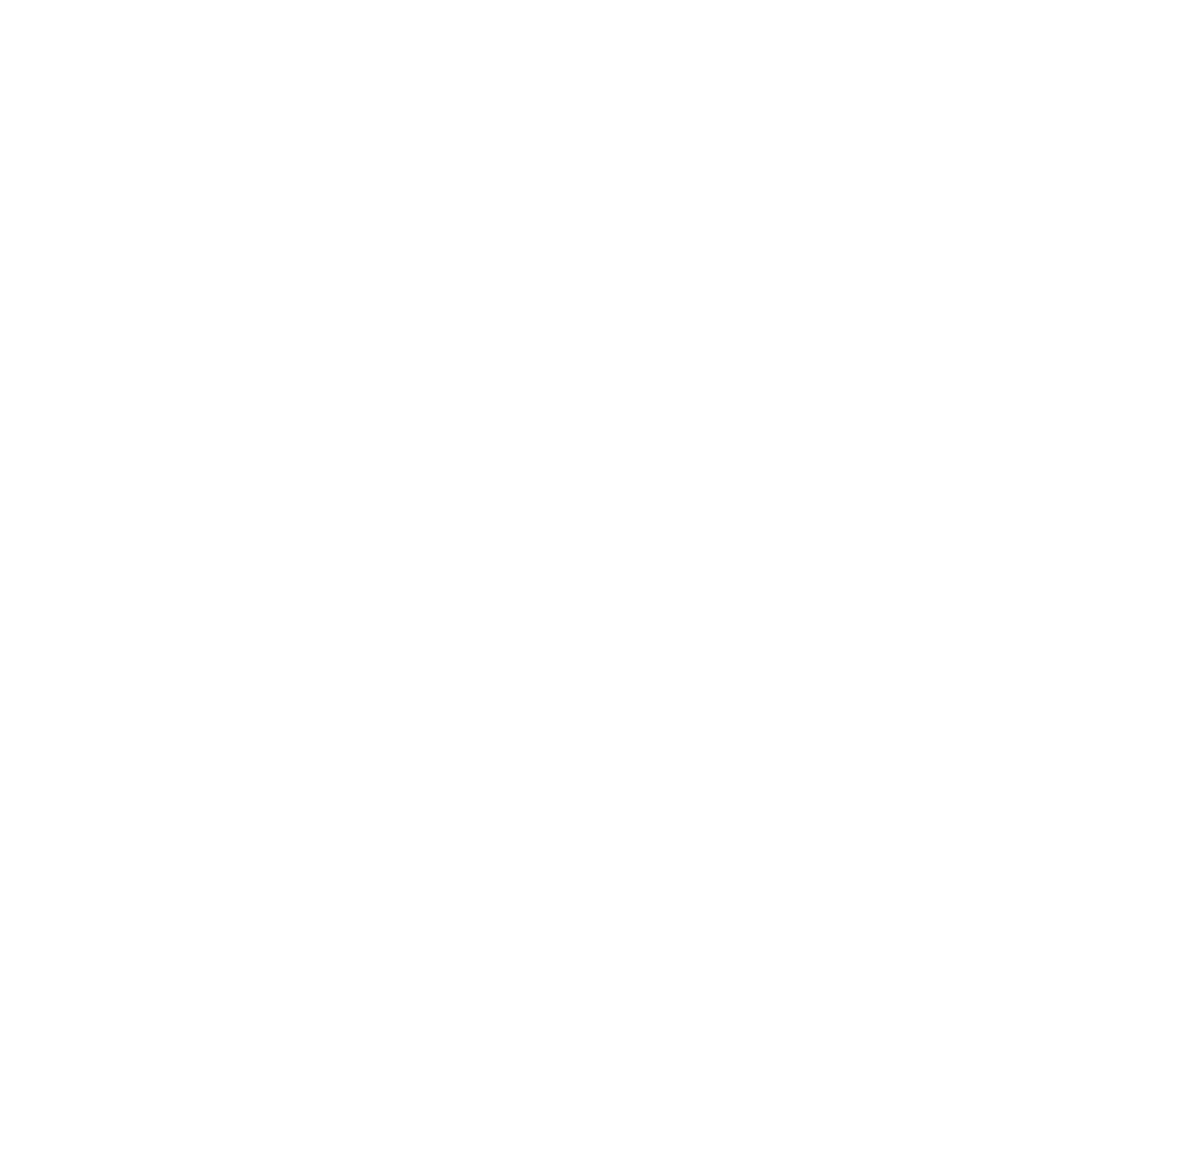 The Witness Foundation